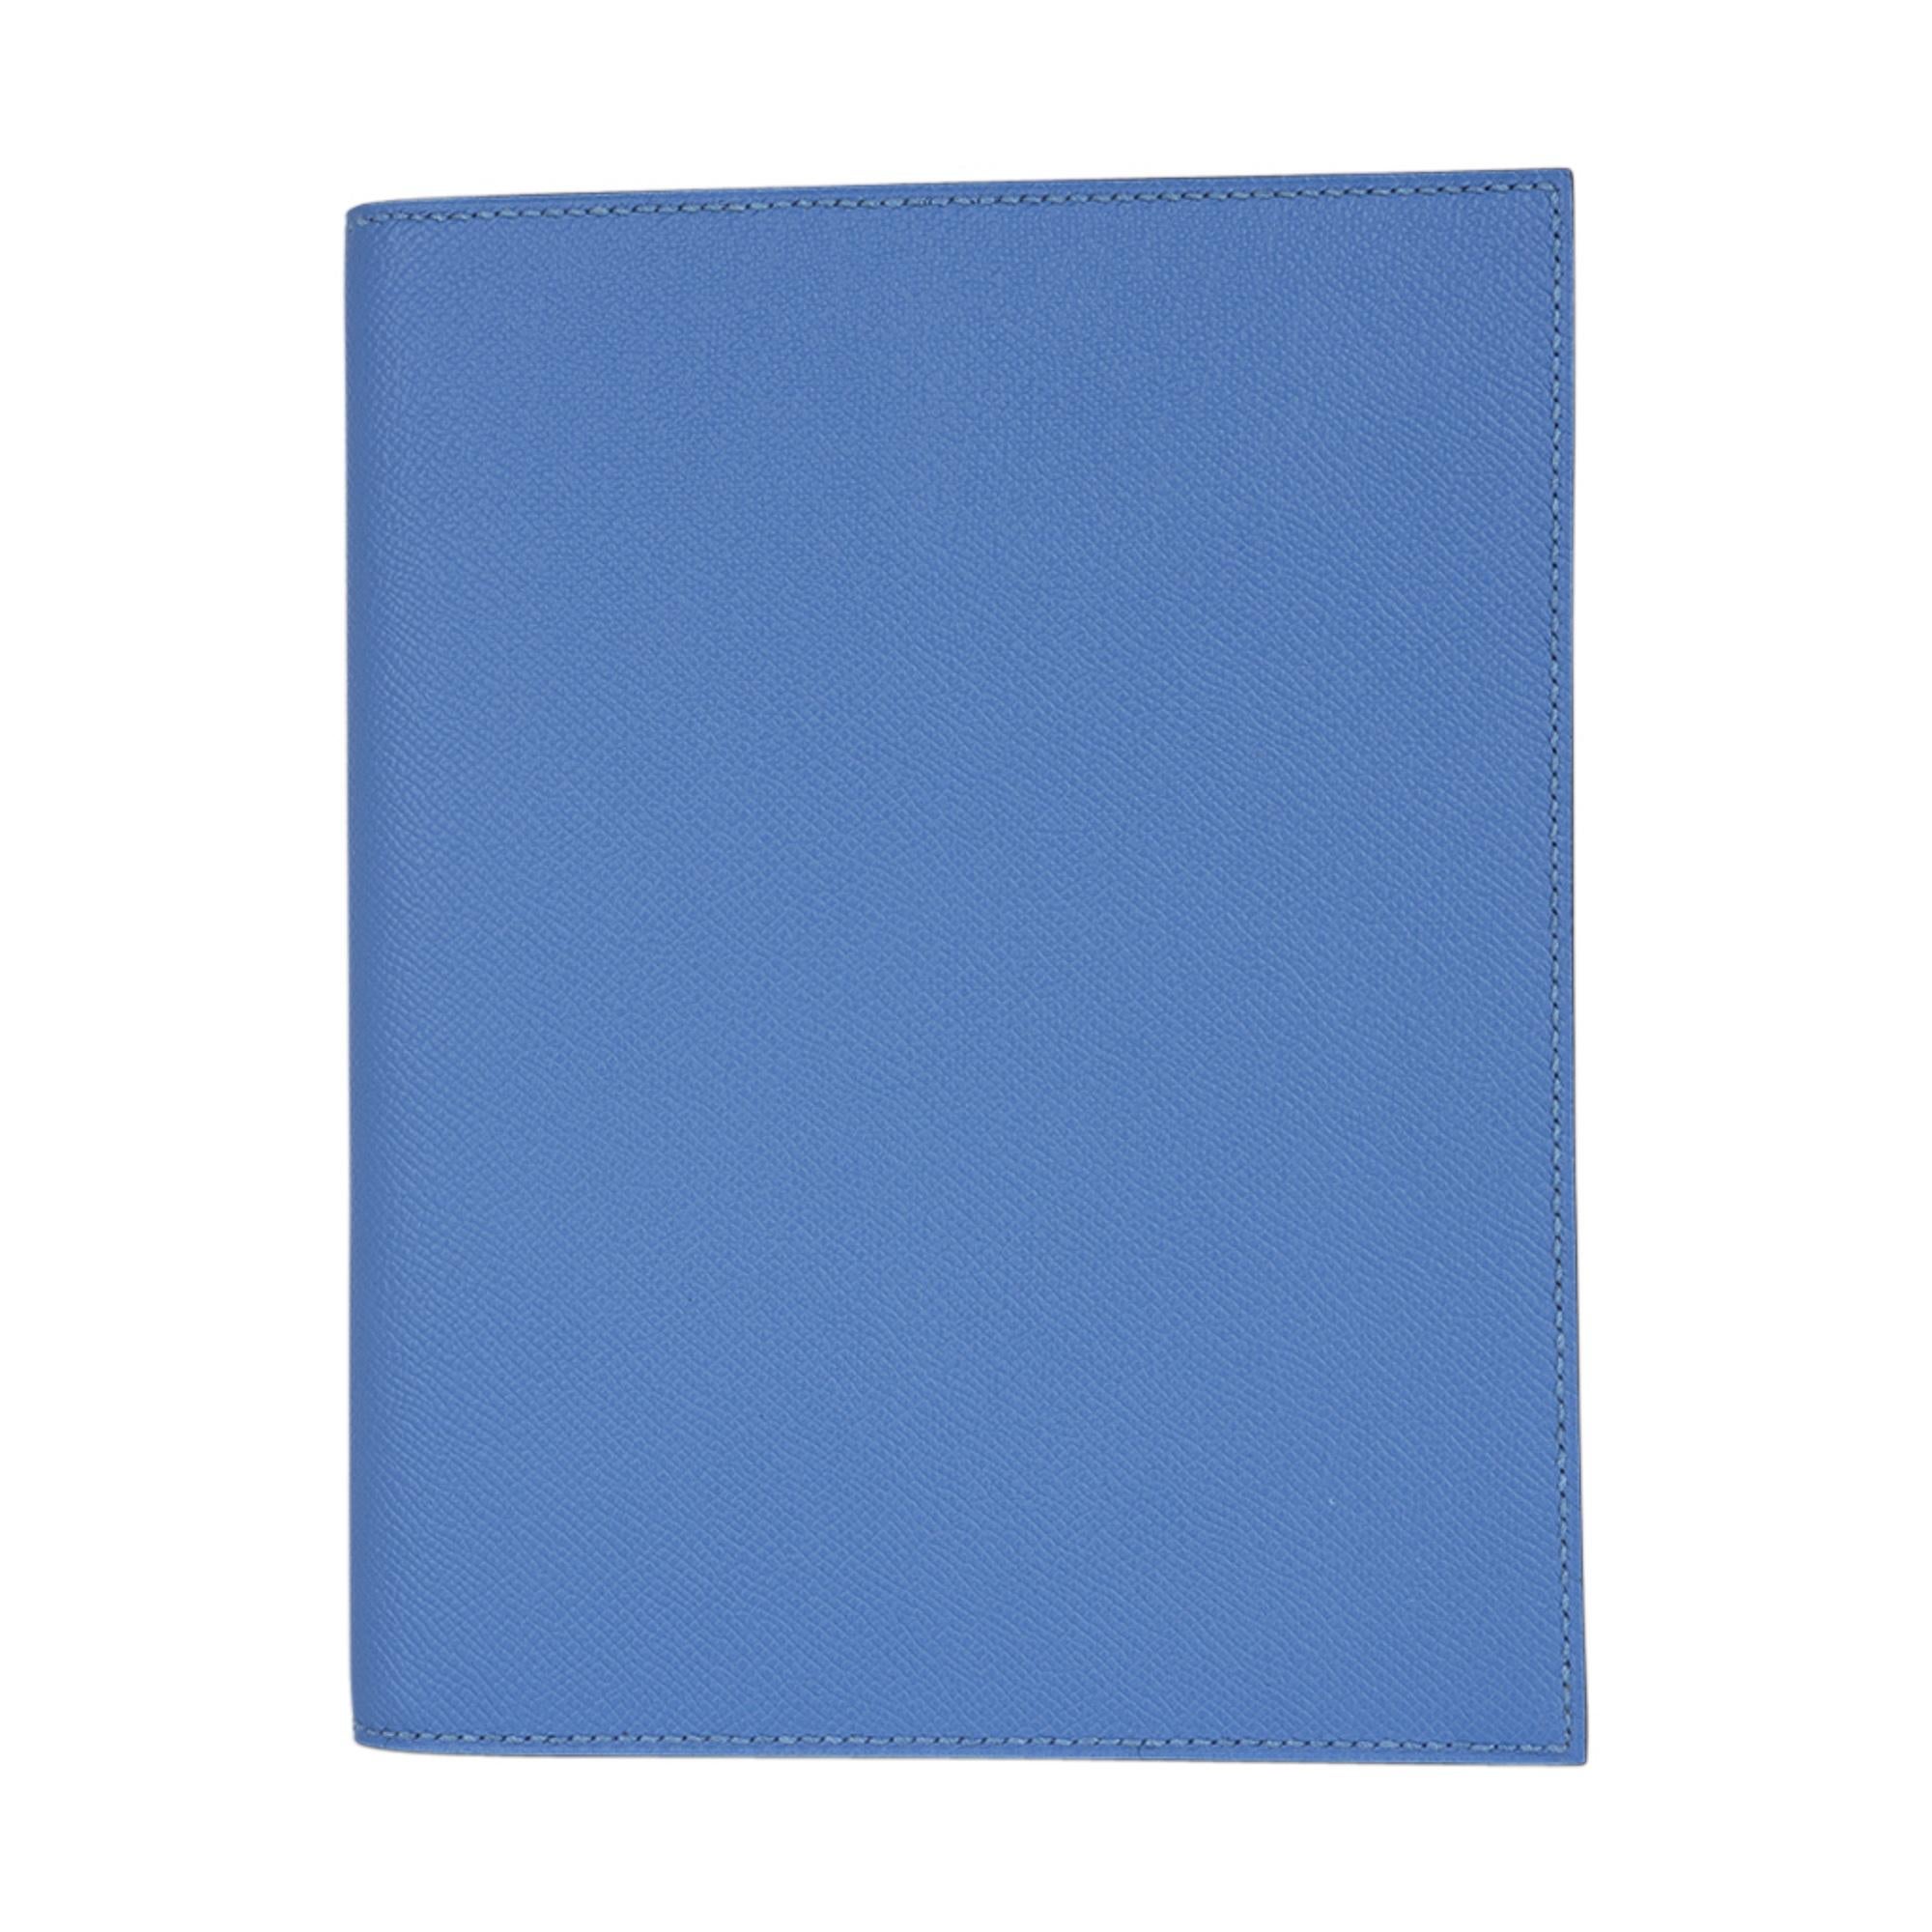 Mightychic offers a guaranteed authentic Hermes Semainier  Agenda Cover featured in Blue Agate.
Sleek clean lines create this timeless chic Hermes agenda.
Epsom leather.
Tone on tone stitching.
Inside slot pocket.
Comes with signature Hermes